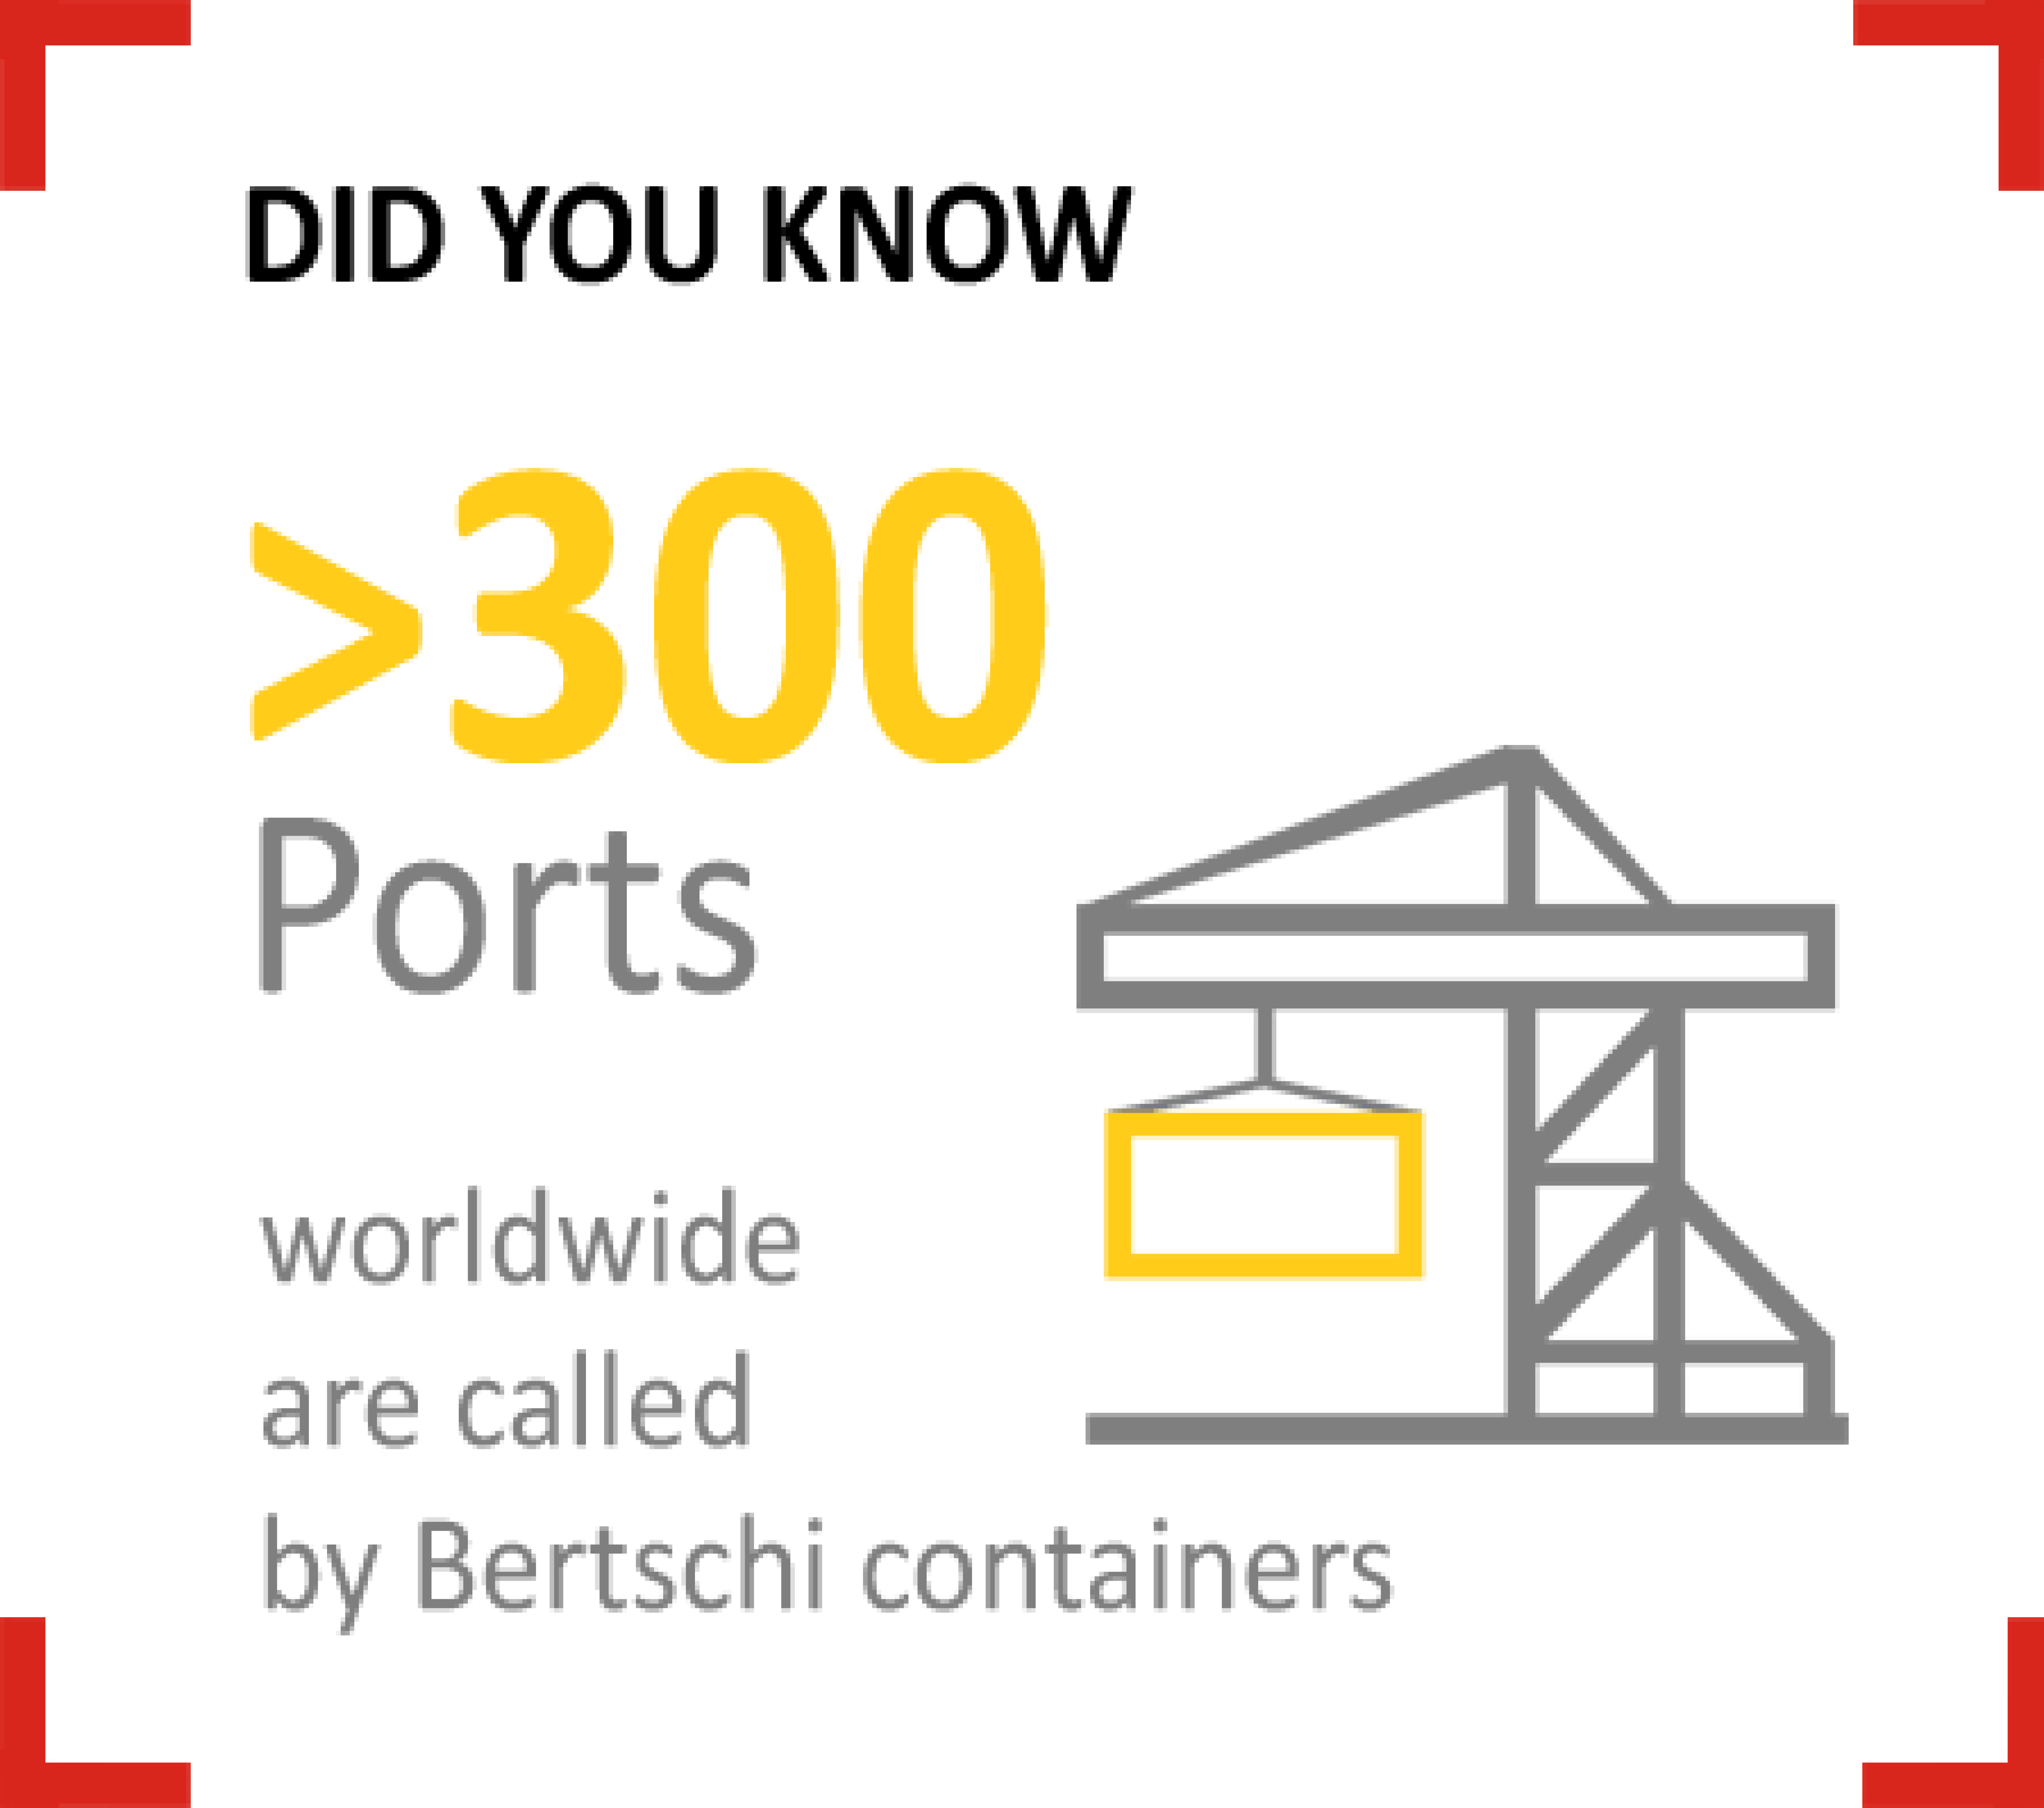 A figure of the over 300 international ports that are called worldwide byBertschi containers.